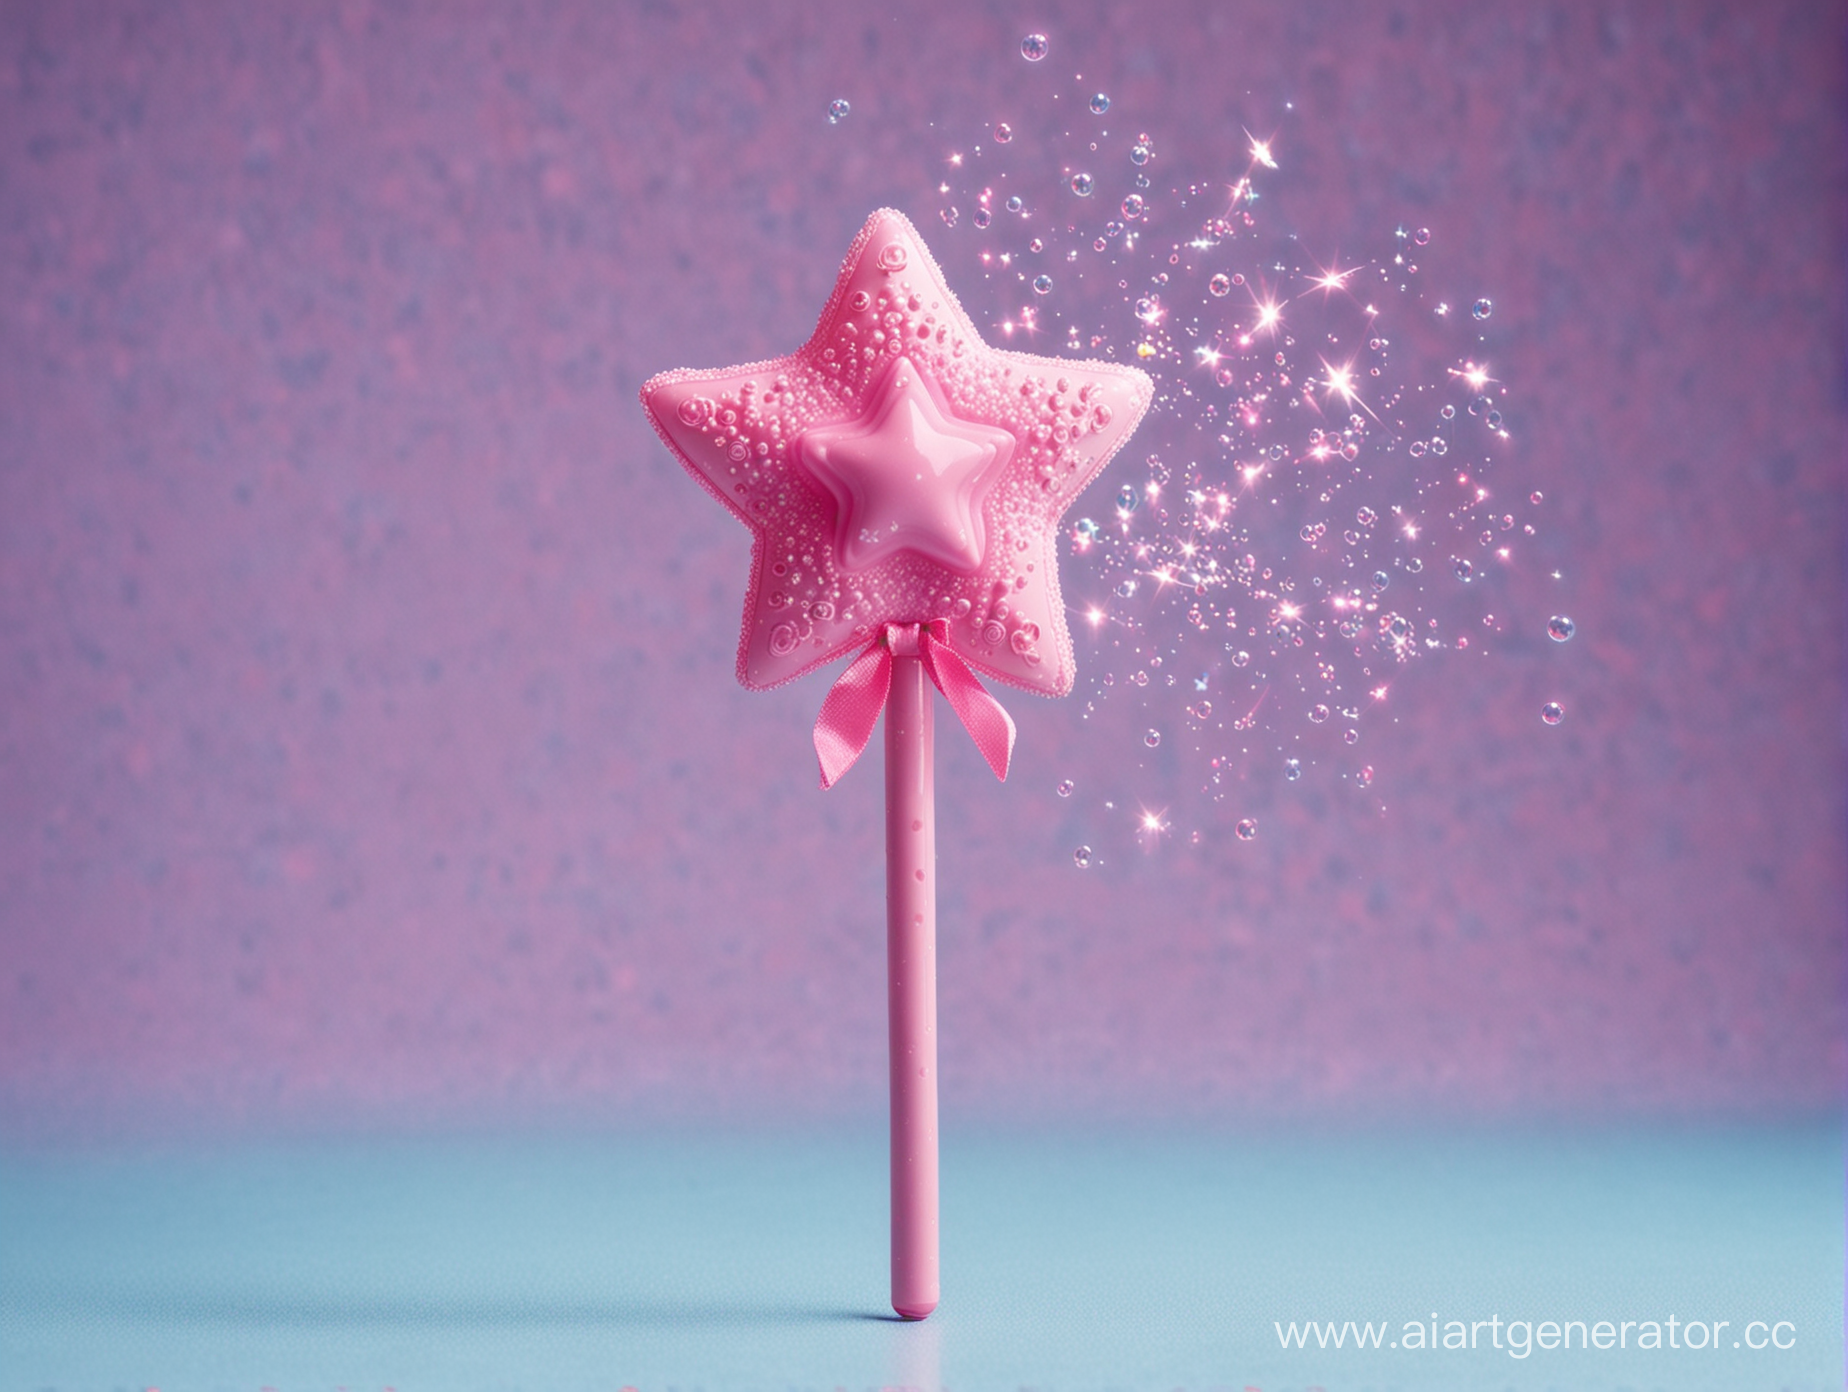 children's toy pink magic wand on a blue background, around bubbles, radiance and magic